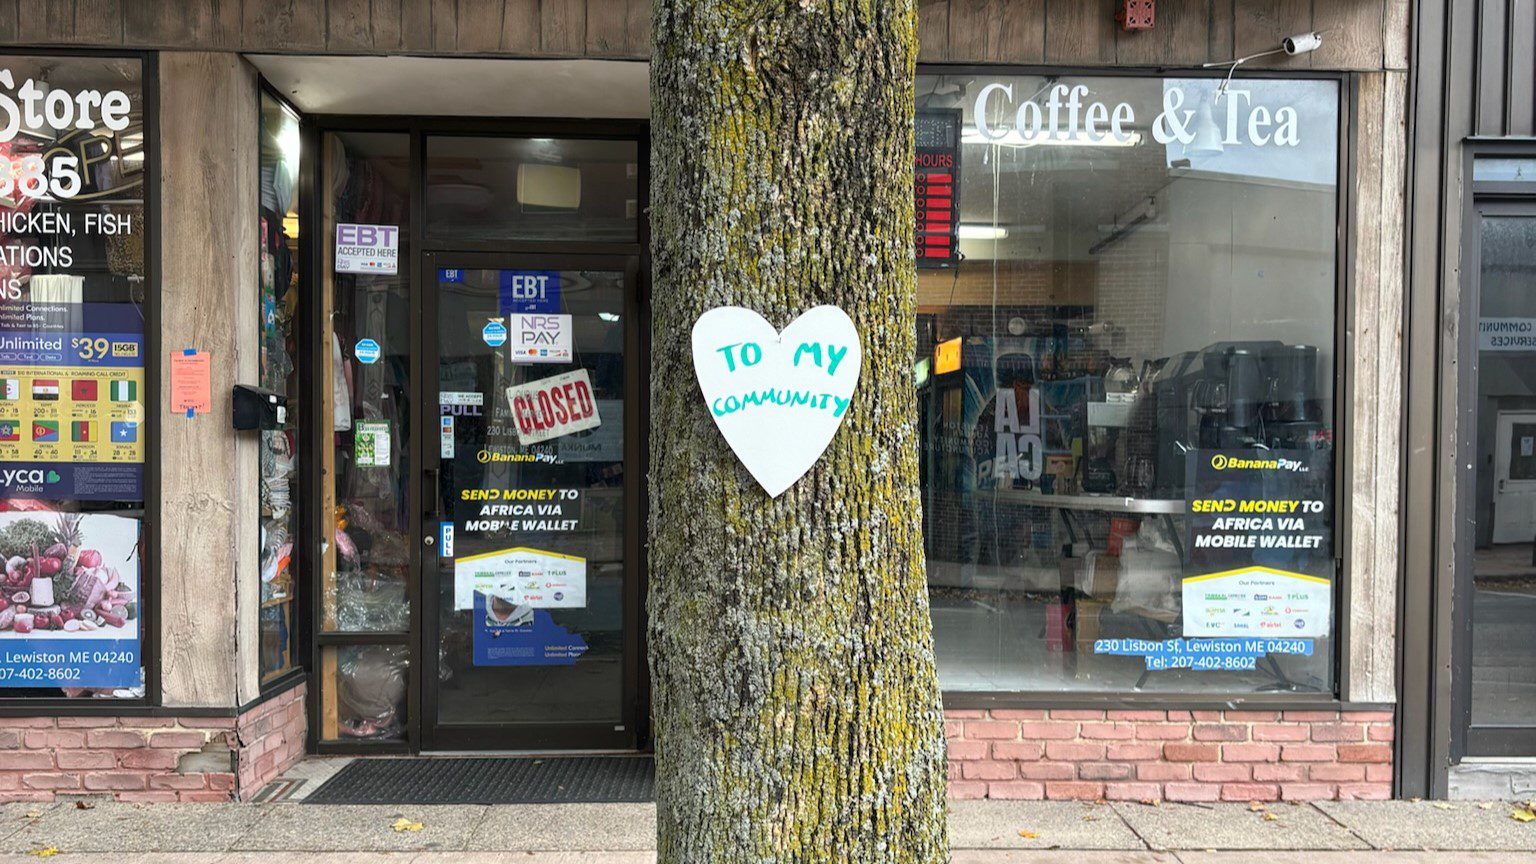 A white paper heart that says to my community is stapled to a tree.